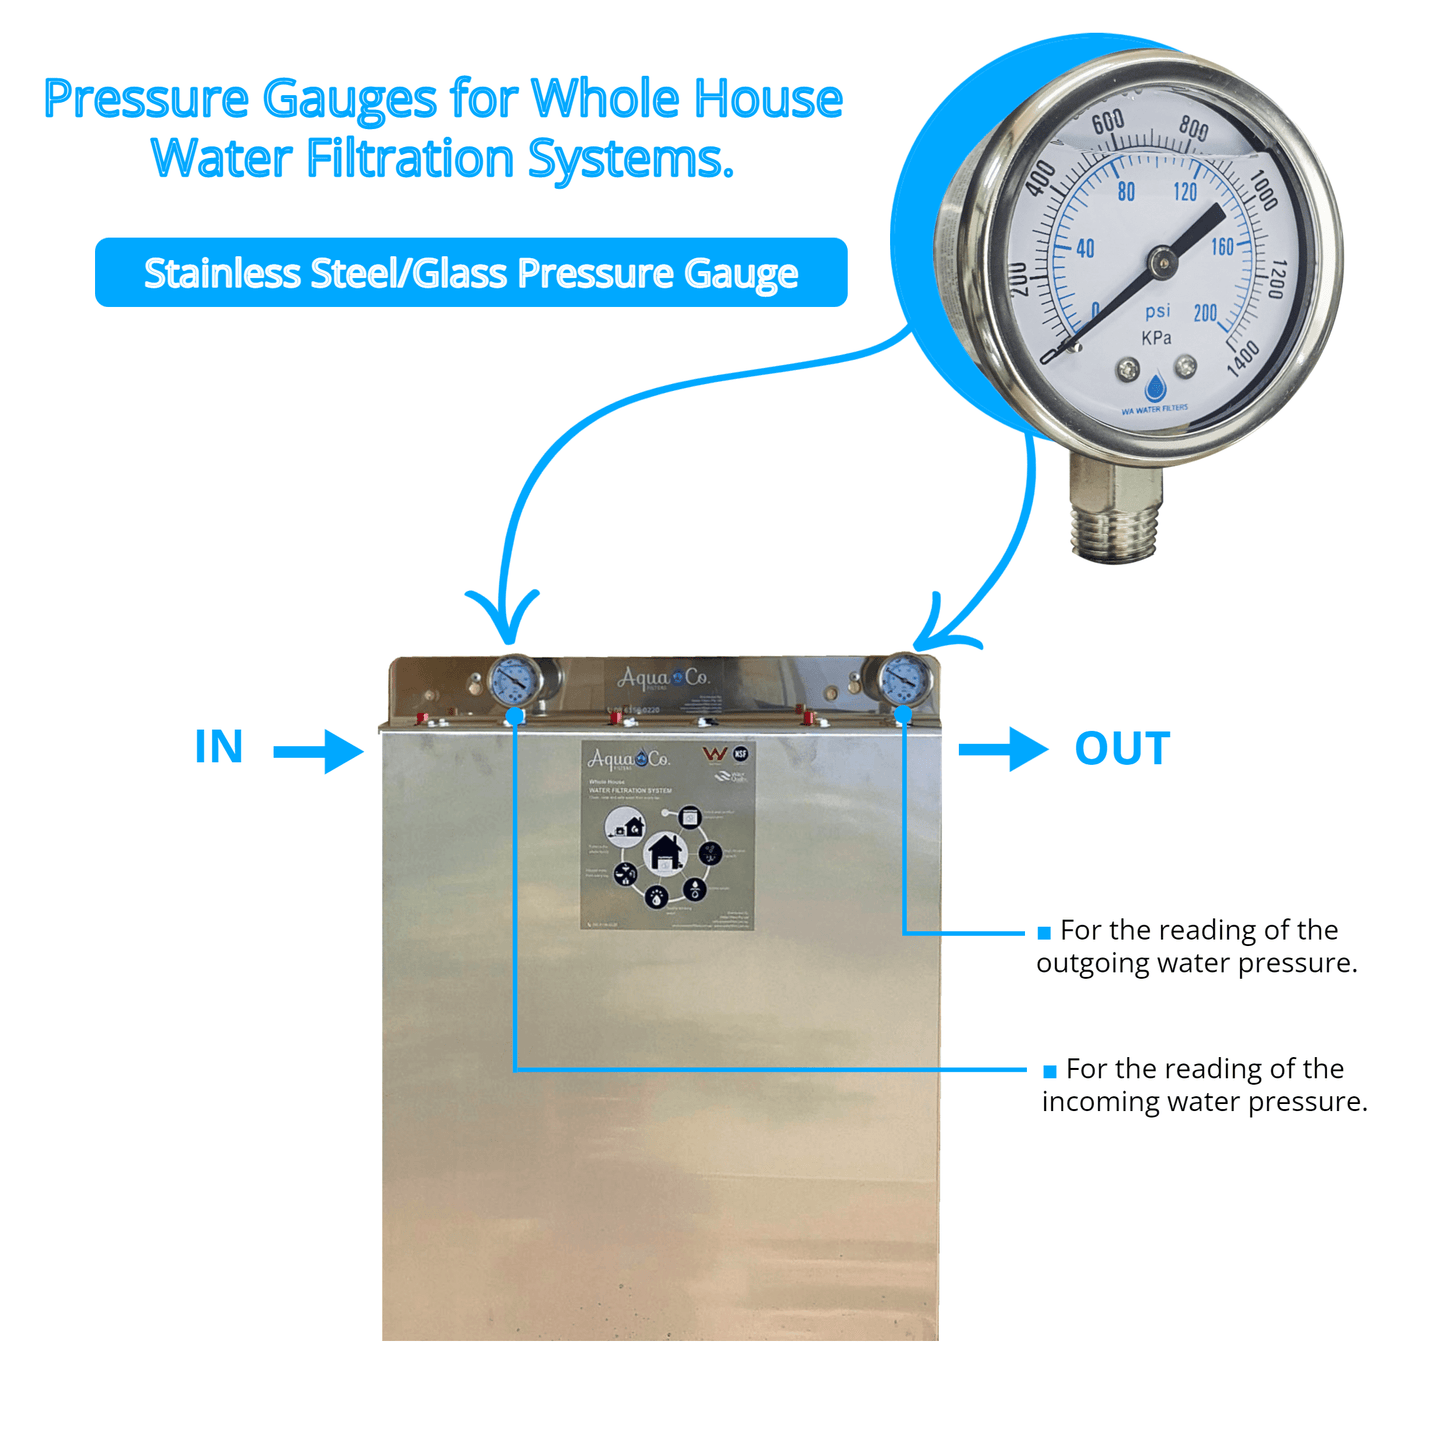 Stainless Steel/Glass Pressure Gauges for Whole House Filtration System